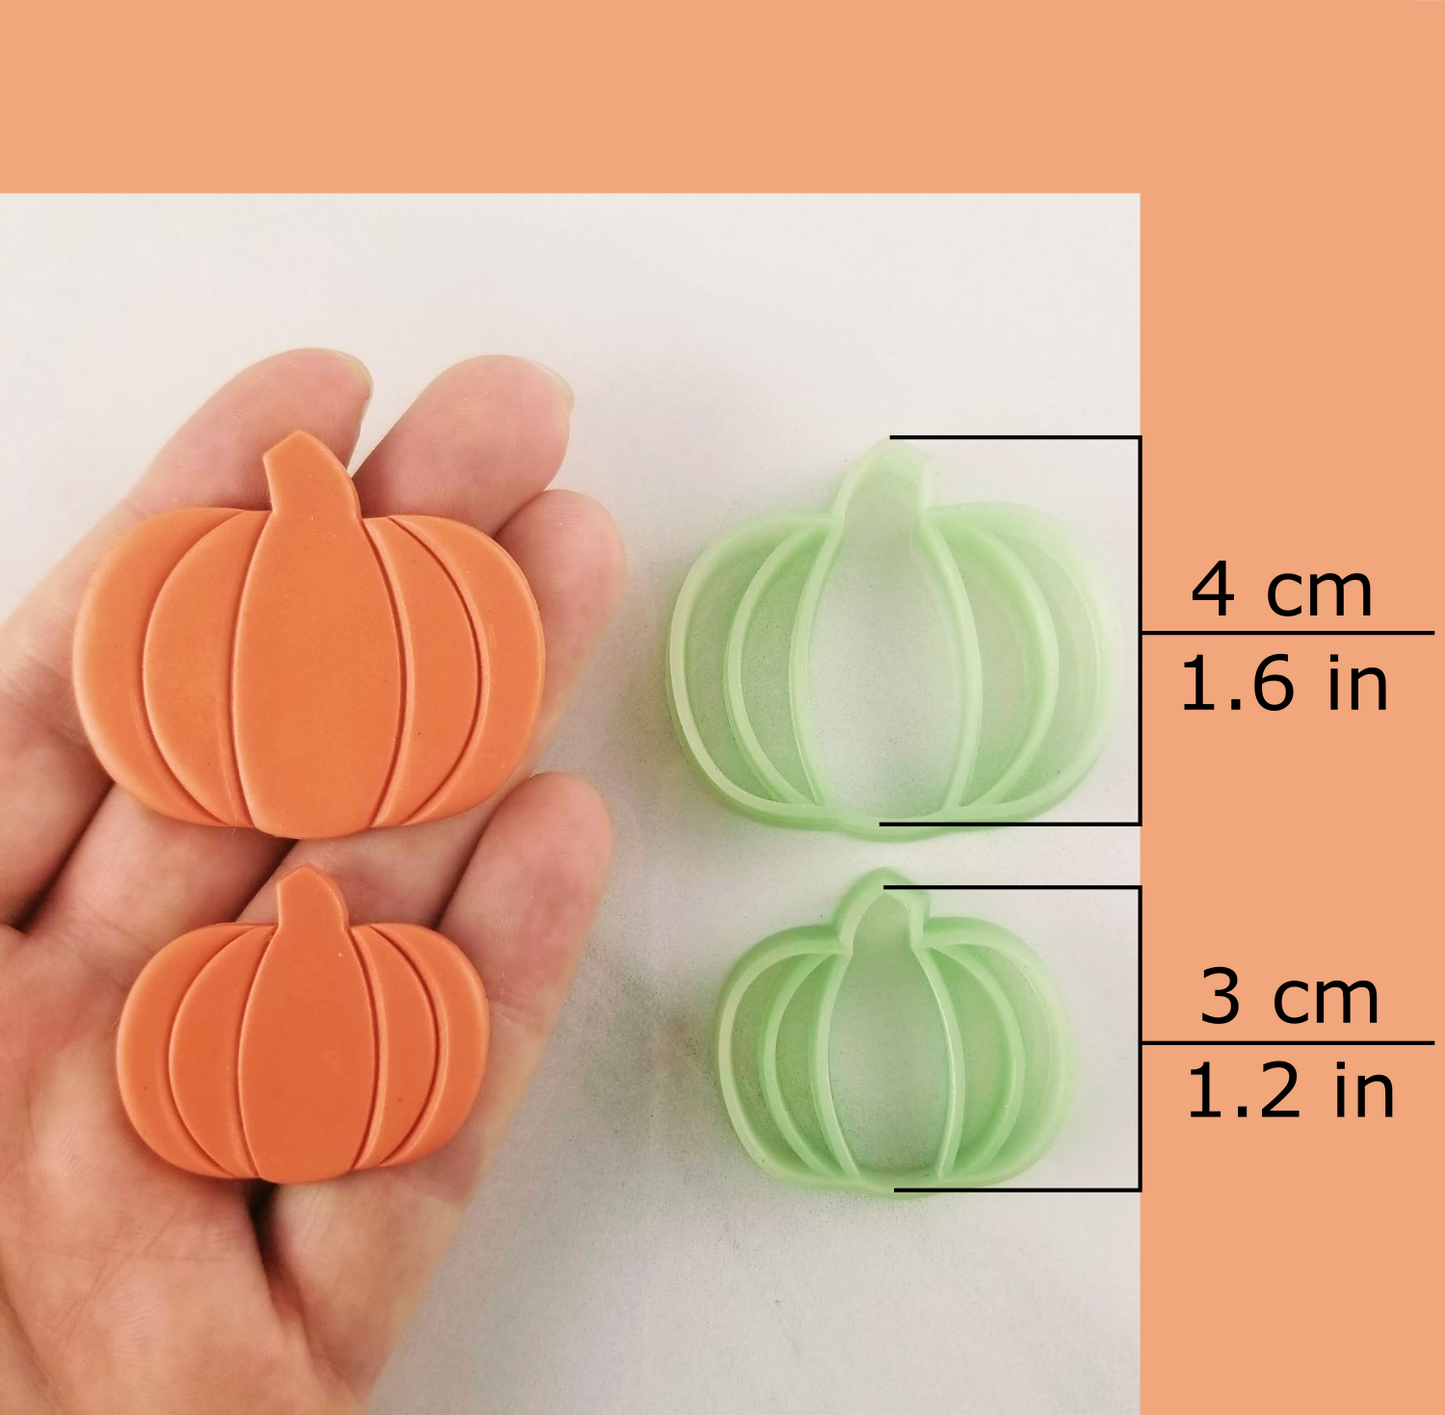 Pumpkin polymer clay cutter available in sizes 4 centimeters / 1.6 inches, and 3 centimeters / 1.2 inches